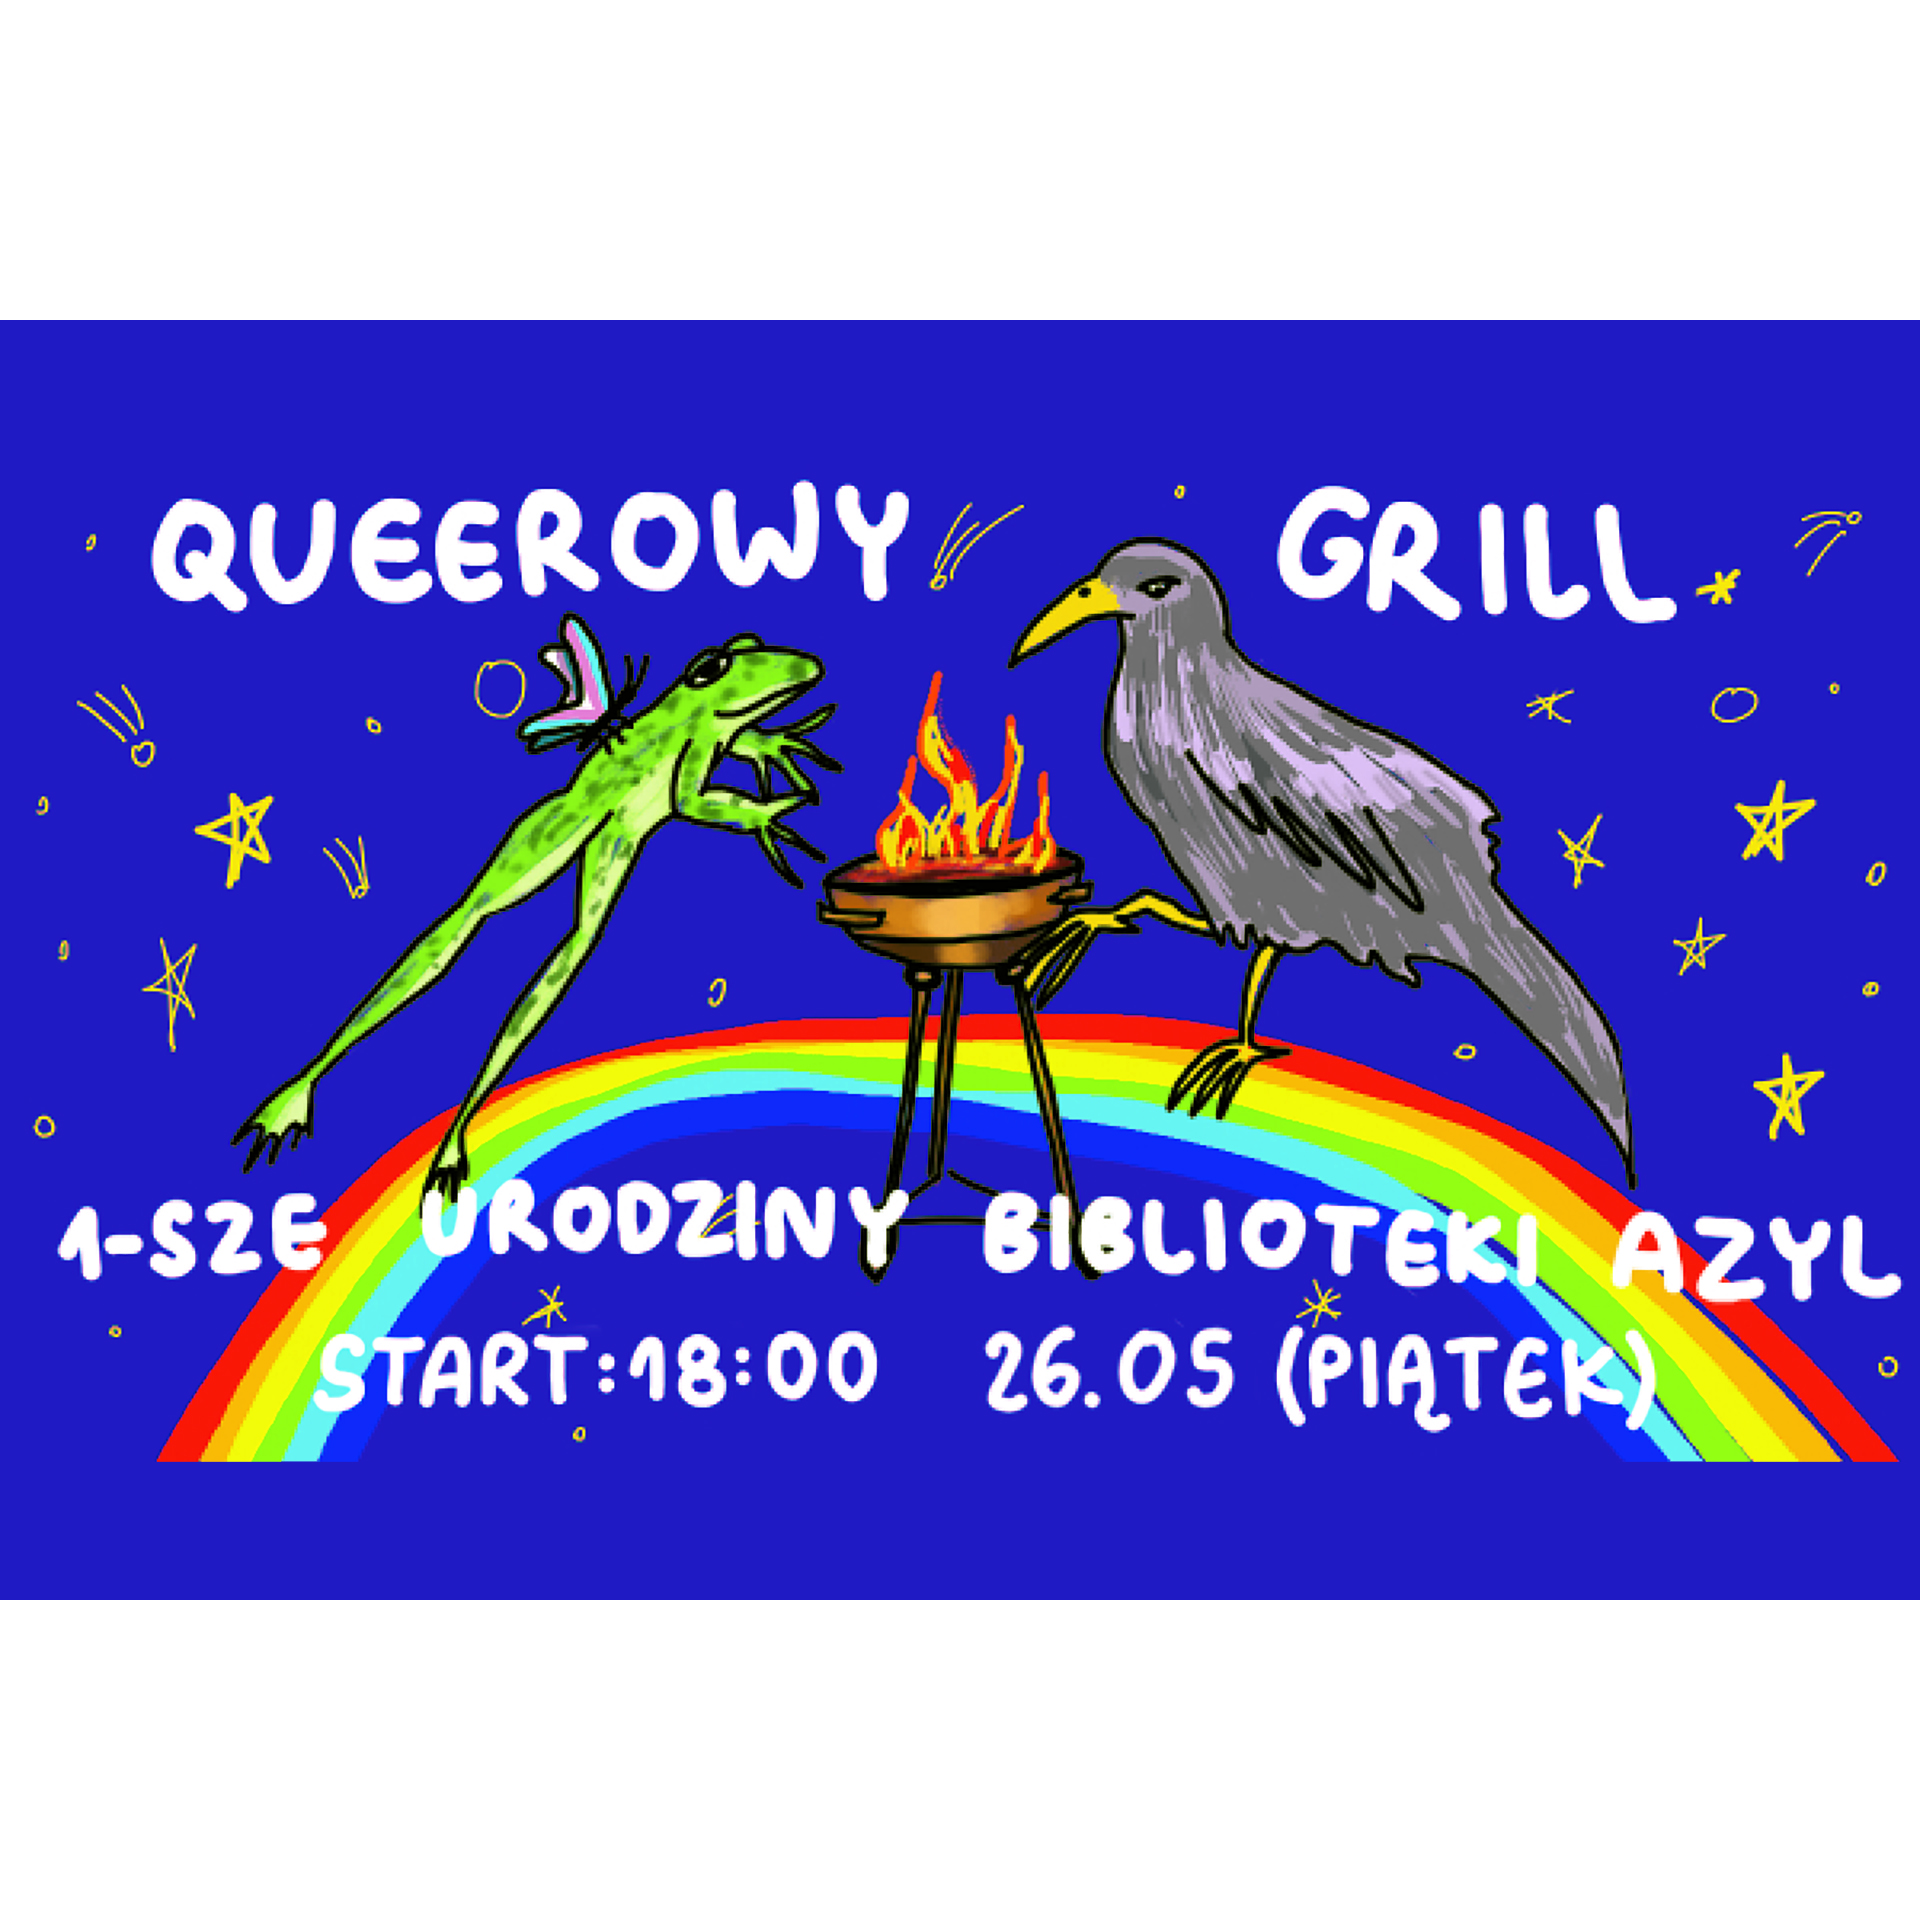 Biblioteka Azyl’s first birthday – a Queer Barbecue